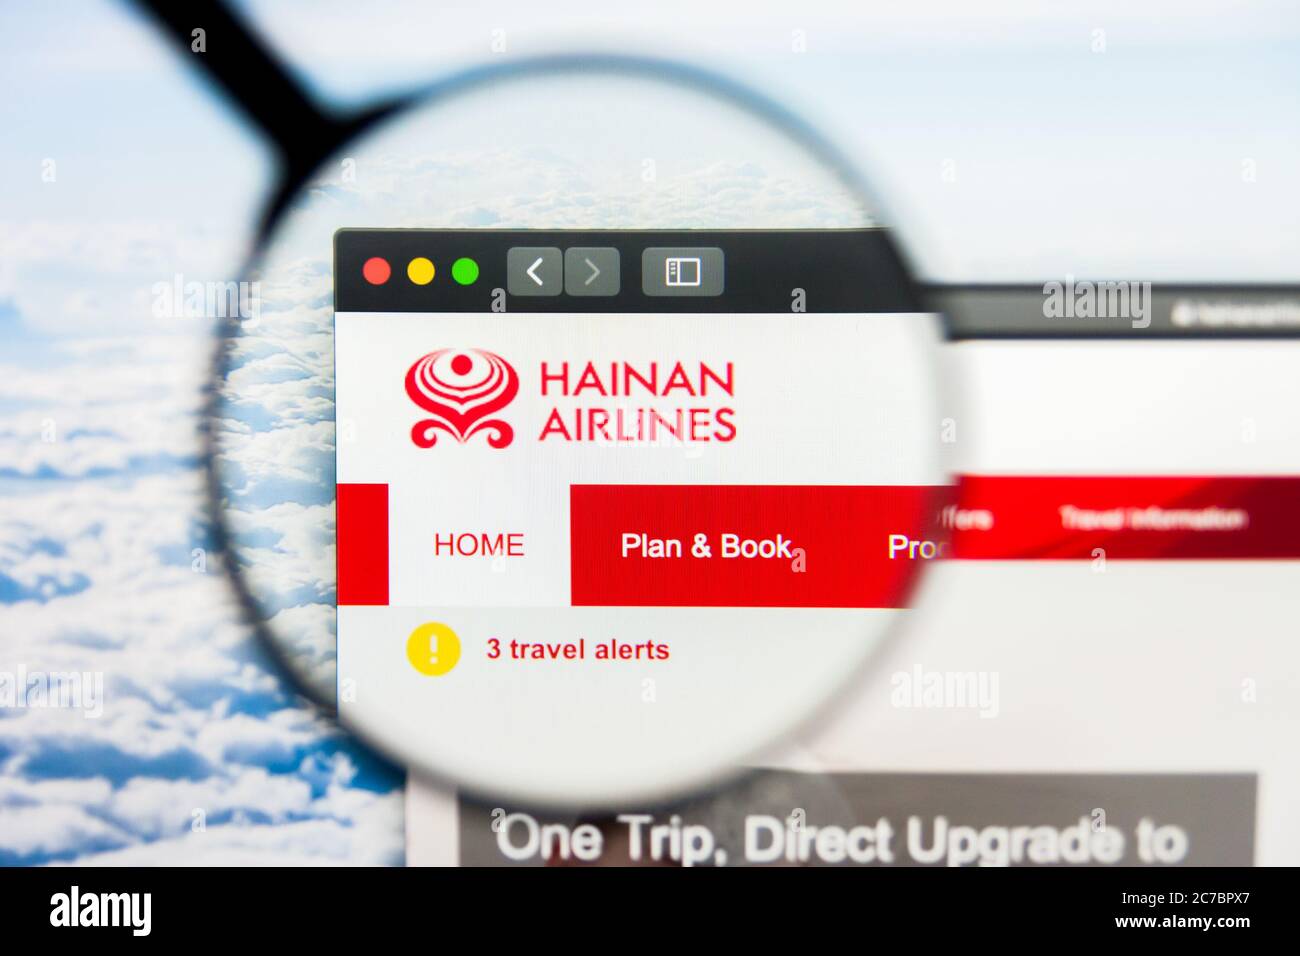 Los Angeles, California, USA - 21 March 2019: Illustrative Editorial of Hainan Airlines website homepage. Hainan Airlines logo visible on display Stock Photo